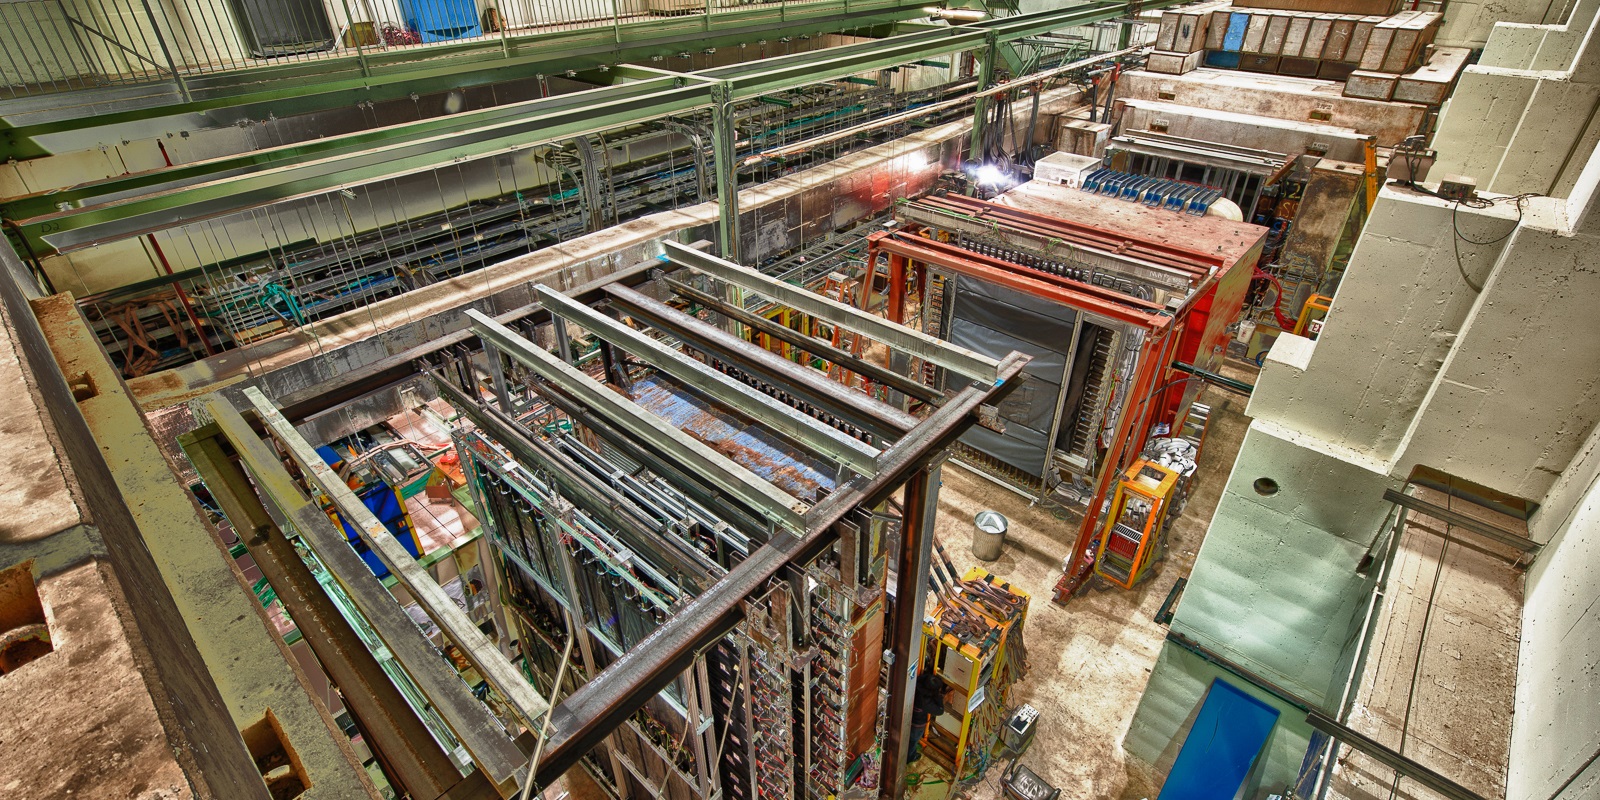 Image of the apparatus used in the experiment. The proton beams pass through each of the shown layers. (Image by Fermi National Accelerator Laboratory.)